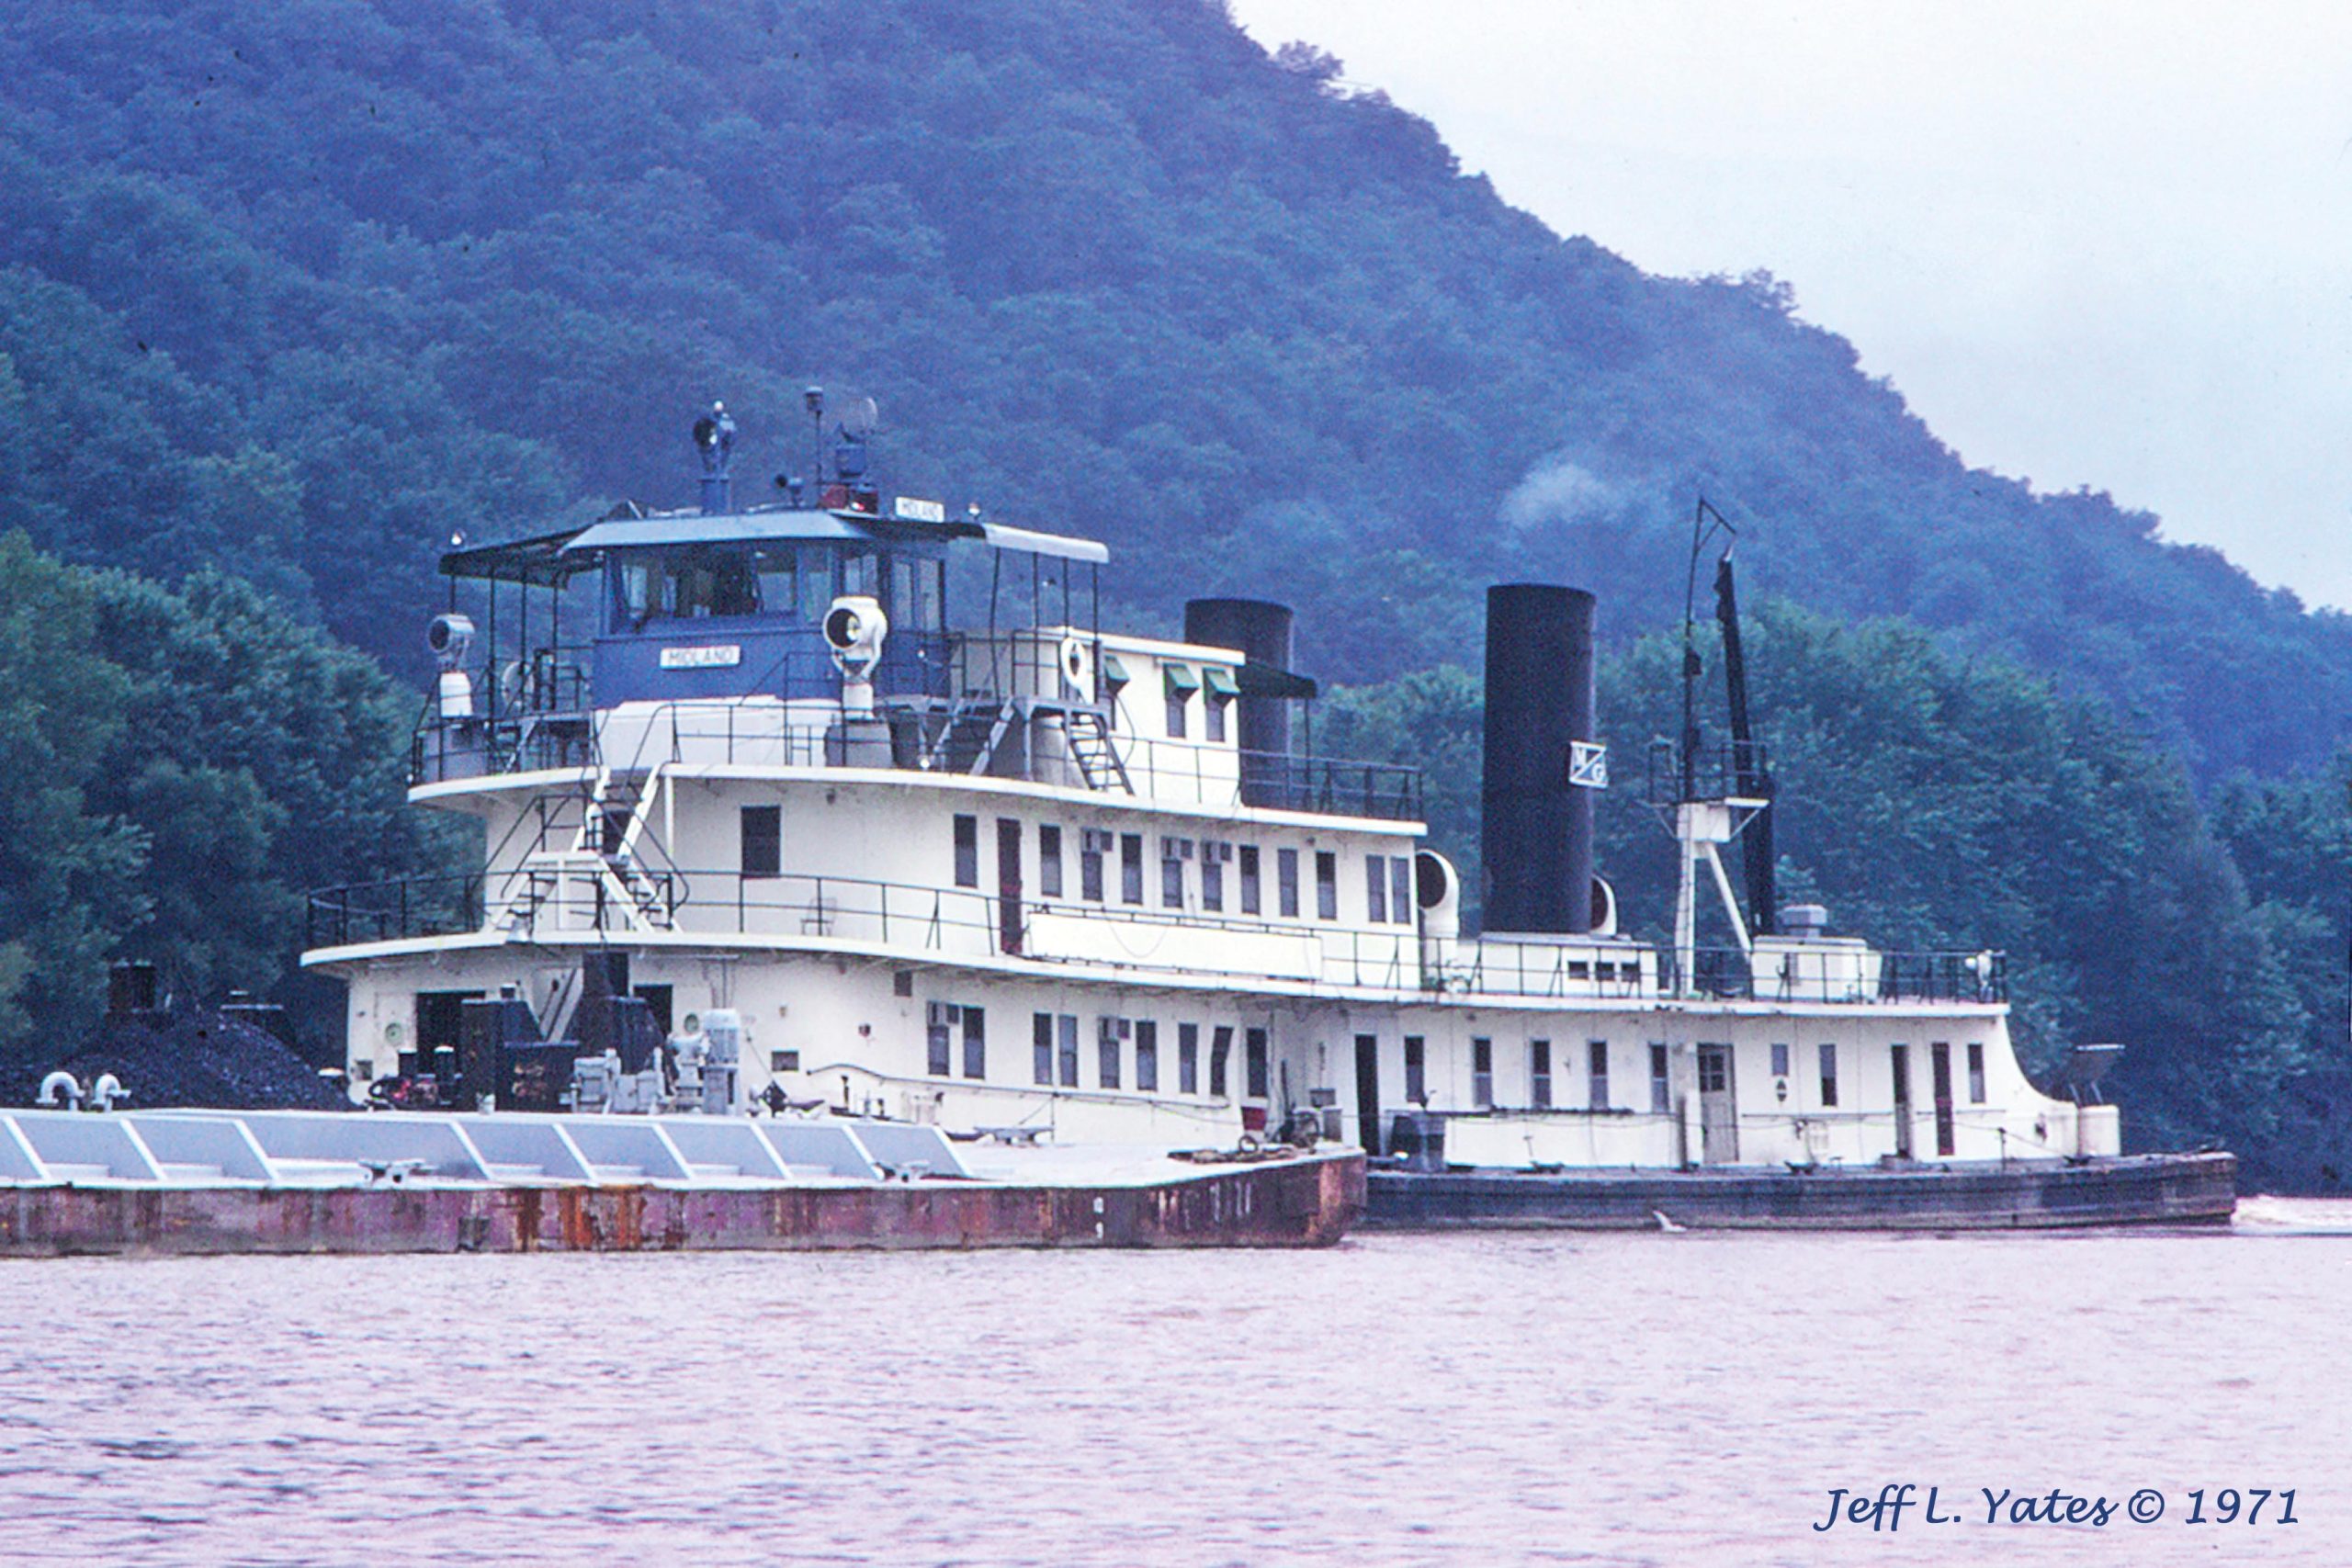 The mv. Midland downbound on the Kanawha River August 6, 1971. (Photo by Jeff Yates)